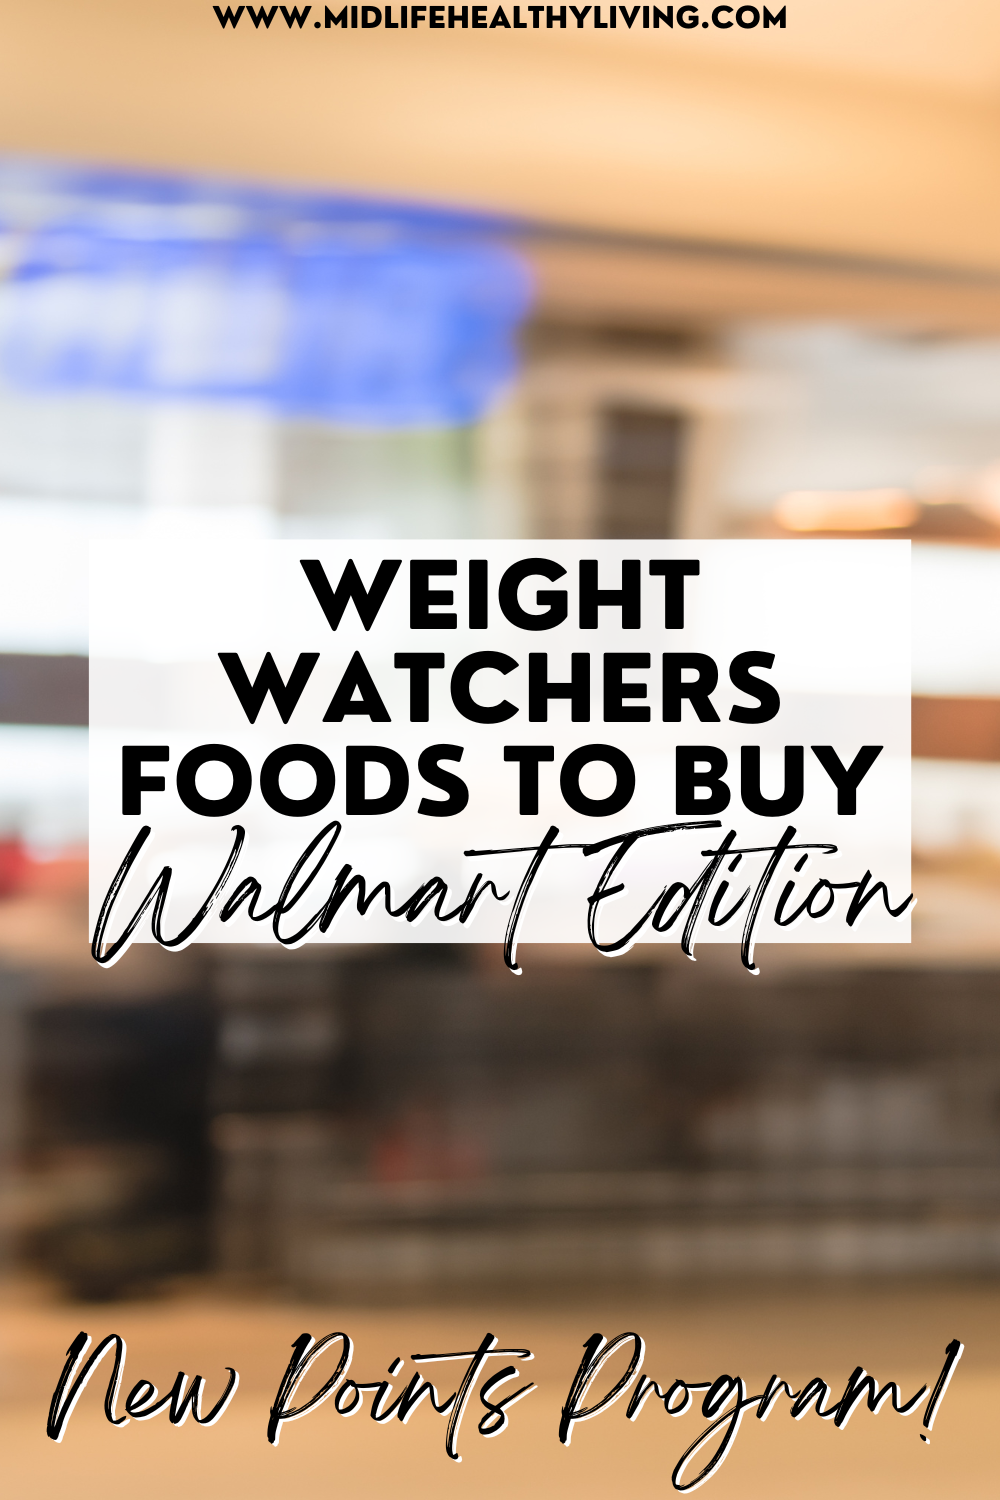 pin showing weight watchers foods to buy from Walmart with new points added wording